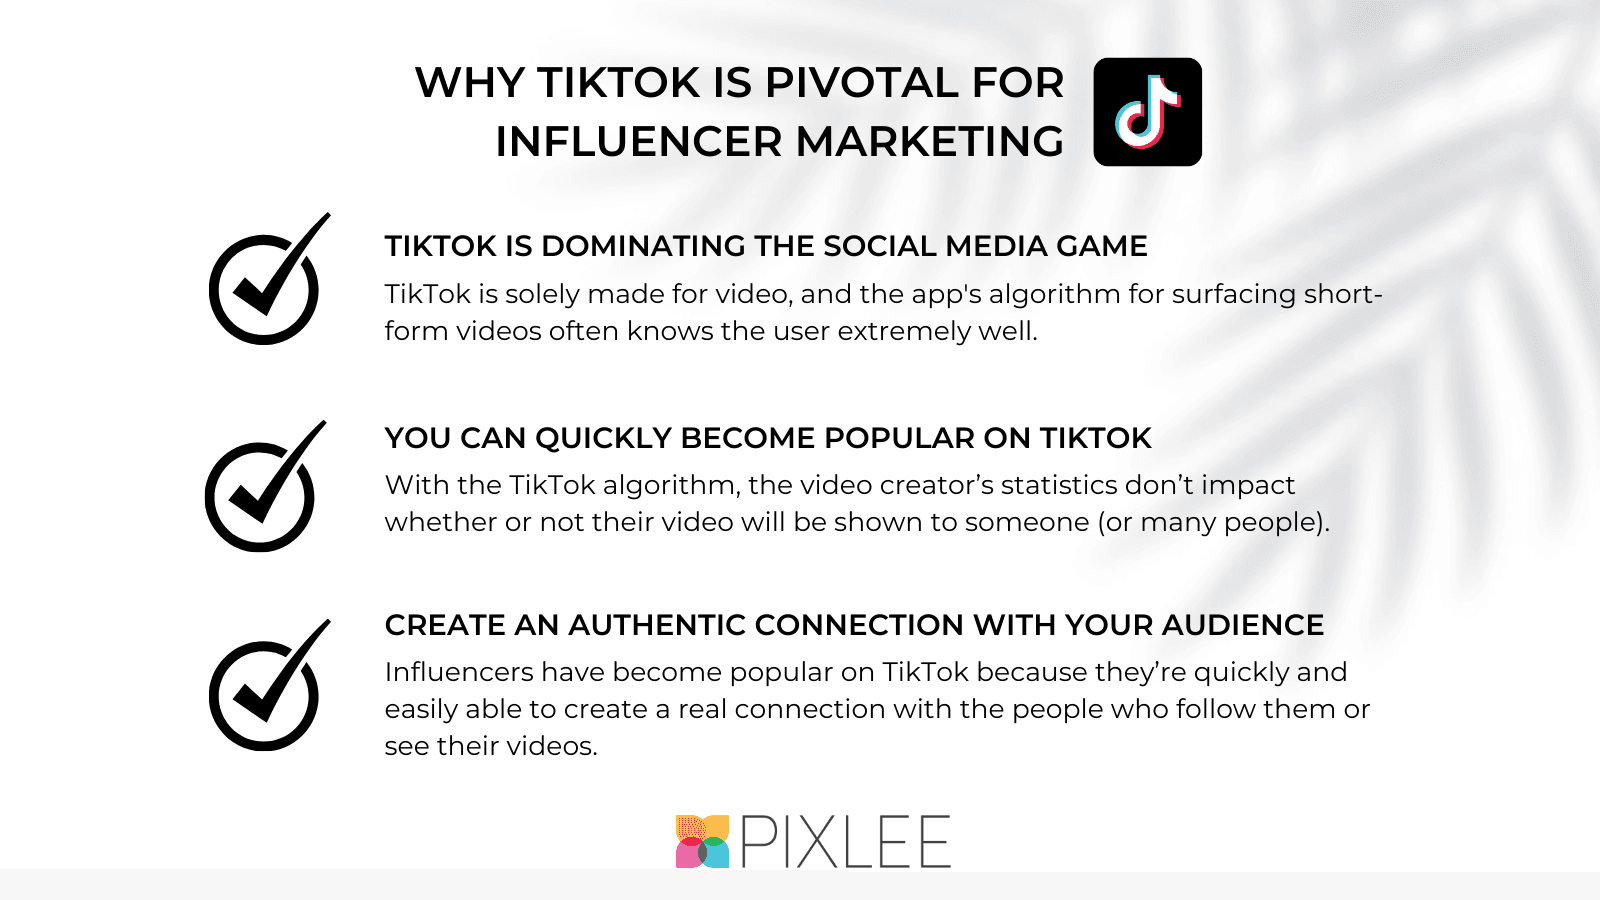 Why TikTok is pivotal for influencer marketing